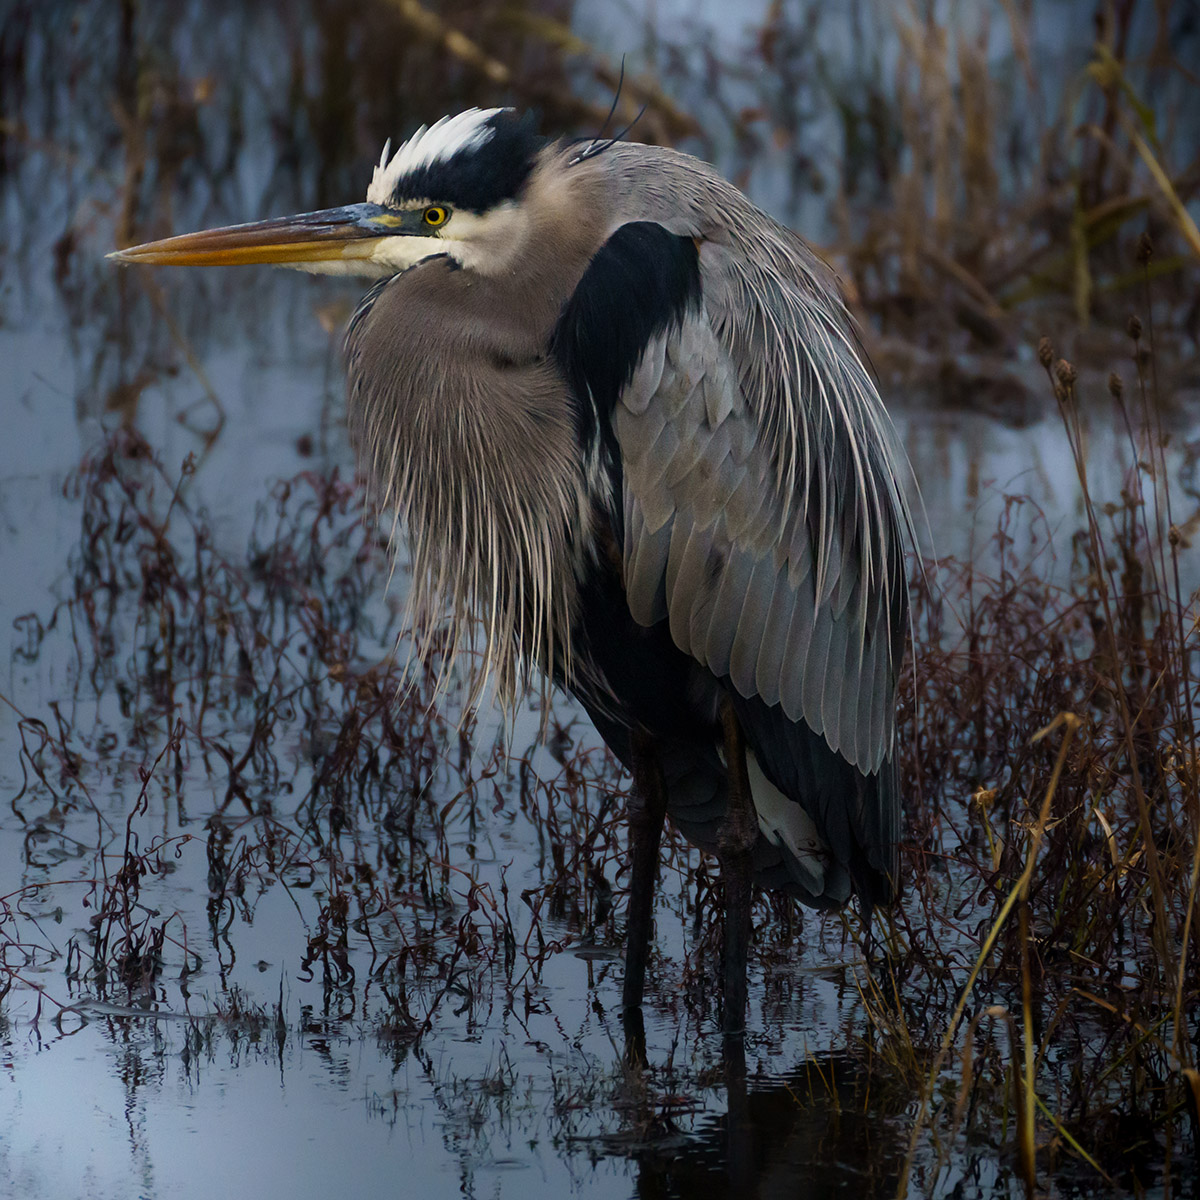 A great blue heron in the water